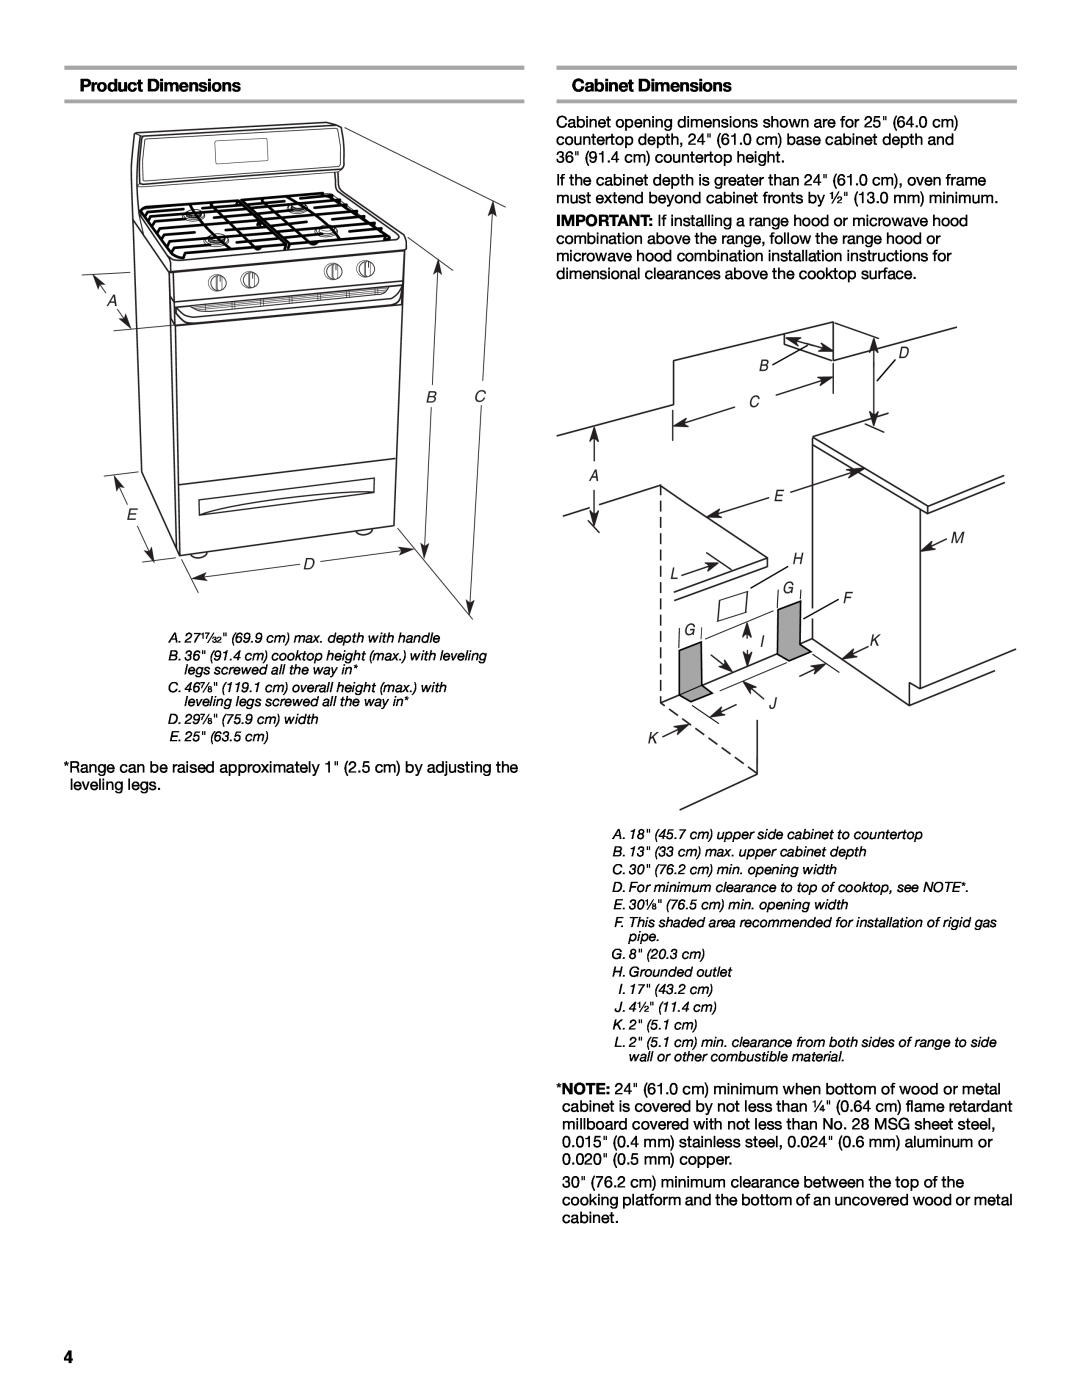 Whirlpool W10196160B installation instructions Product Dimensions, Cabinet Dimensions, A Bc E D 